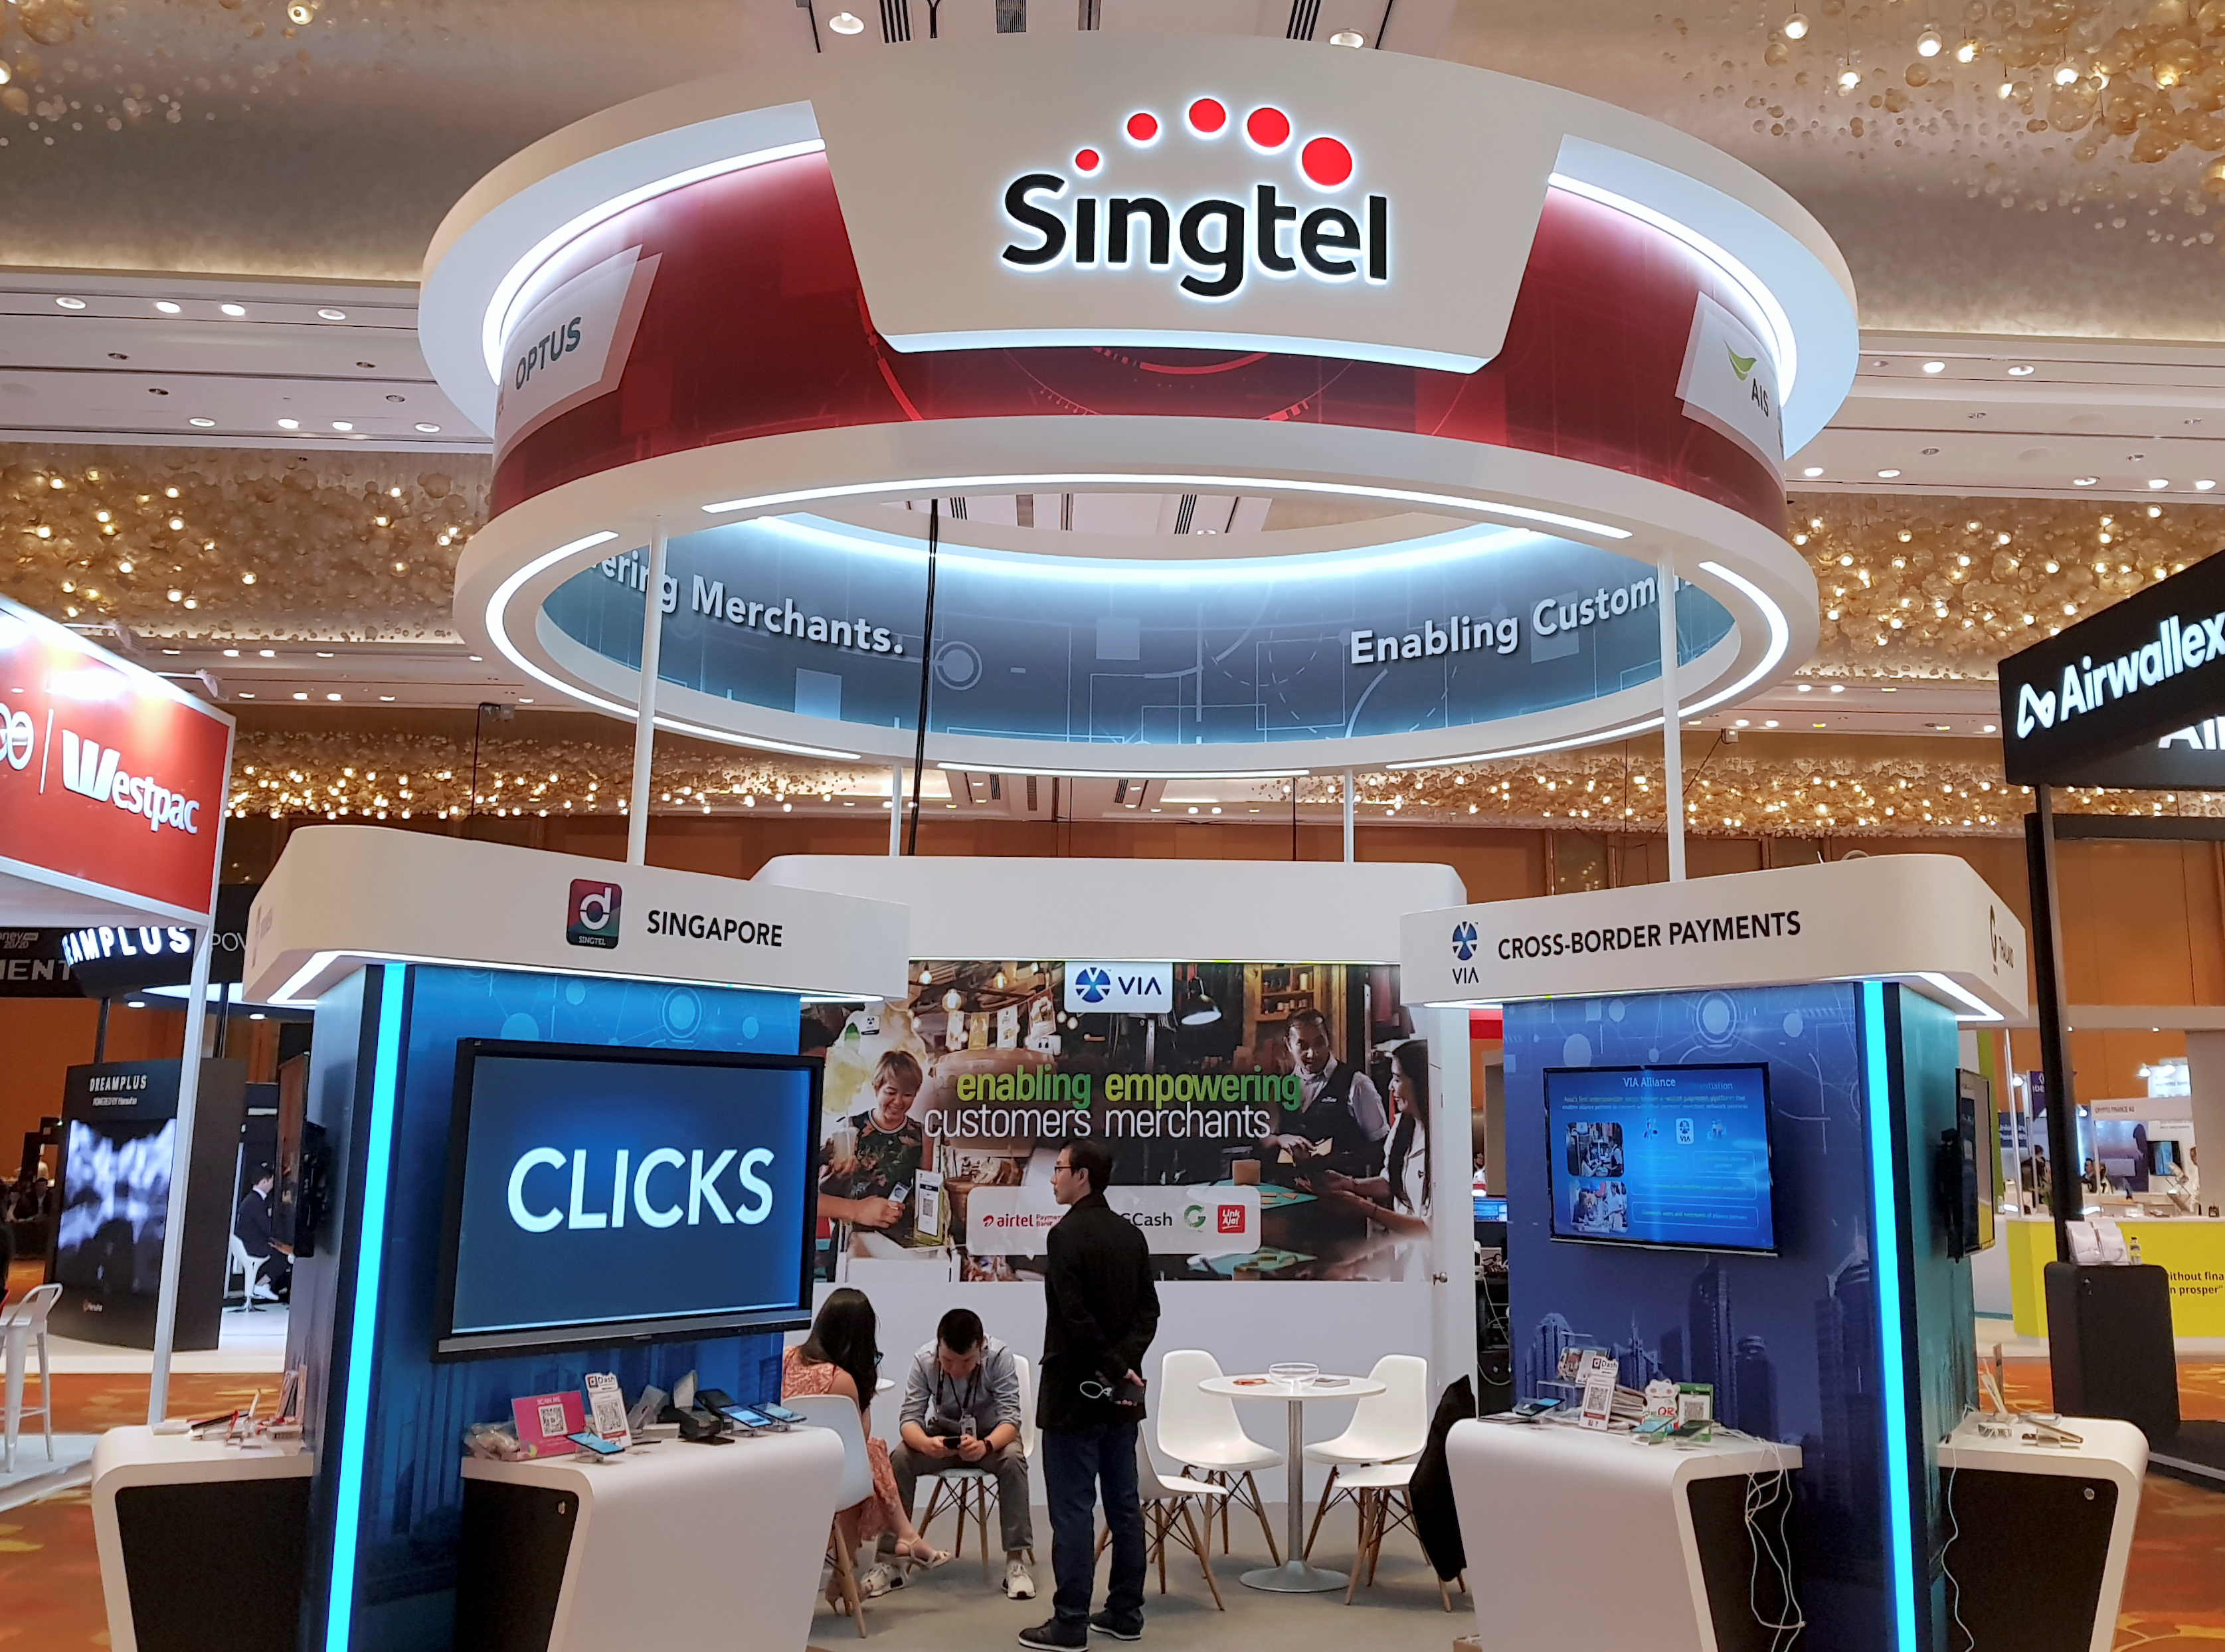 A Singtel booth is pictured at the Money 20/20 Asia Fintech Trade Show in Singapore